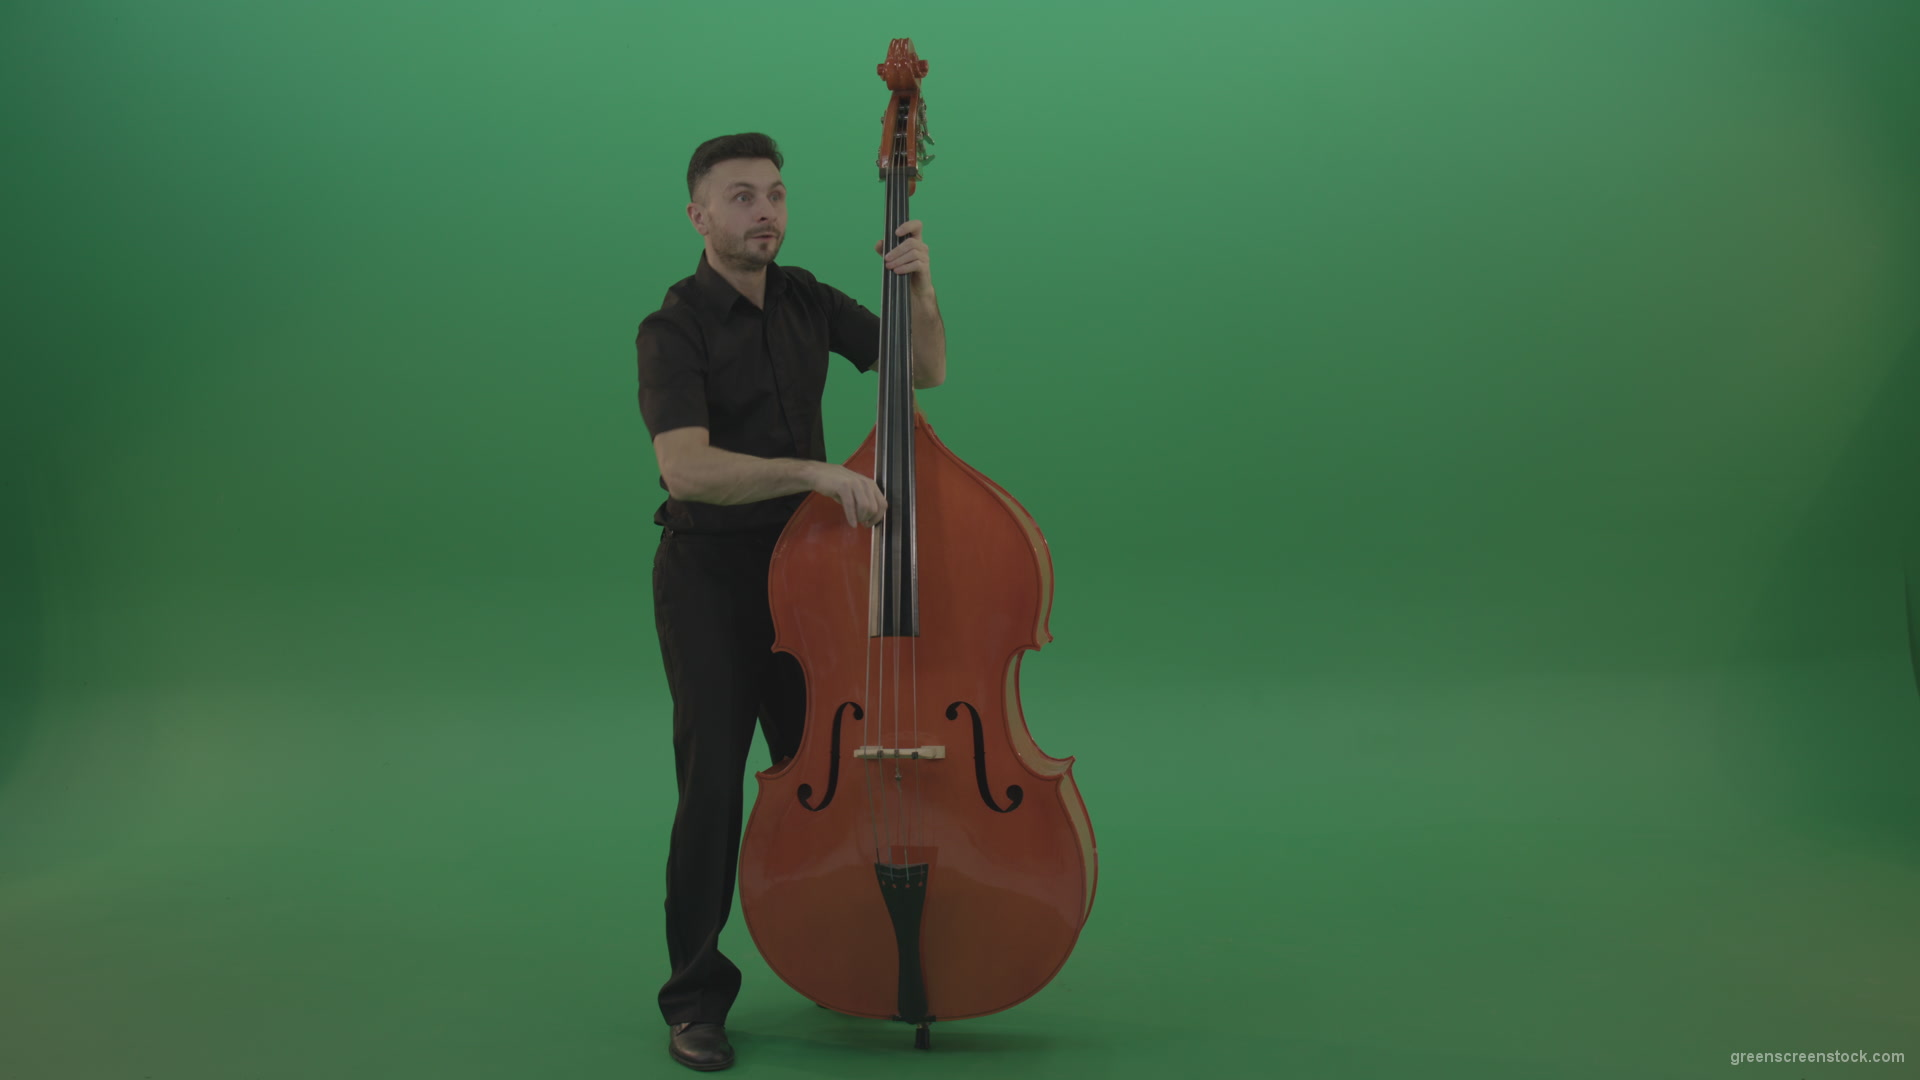 Full-size-man-in-black-uniform-play-jazz-rock-on-double-bass-String-music-instrument-isolated-on-green-screen_005 Green Screen Stock